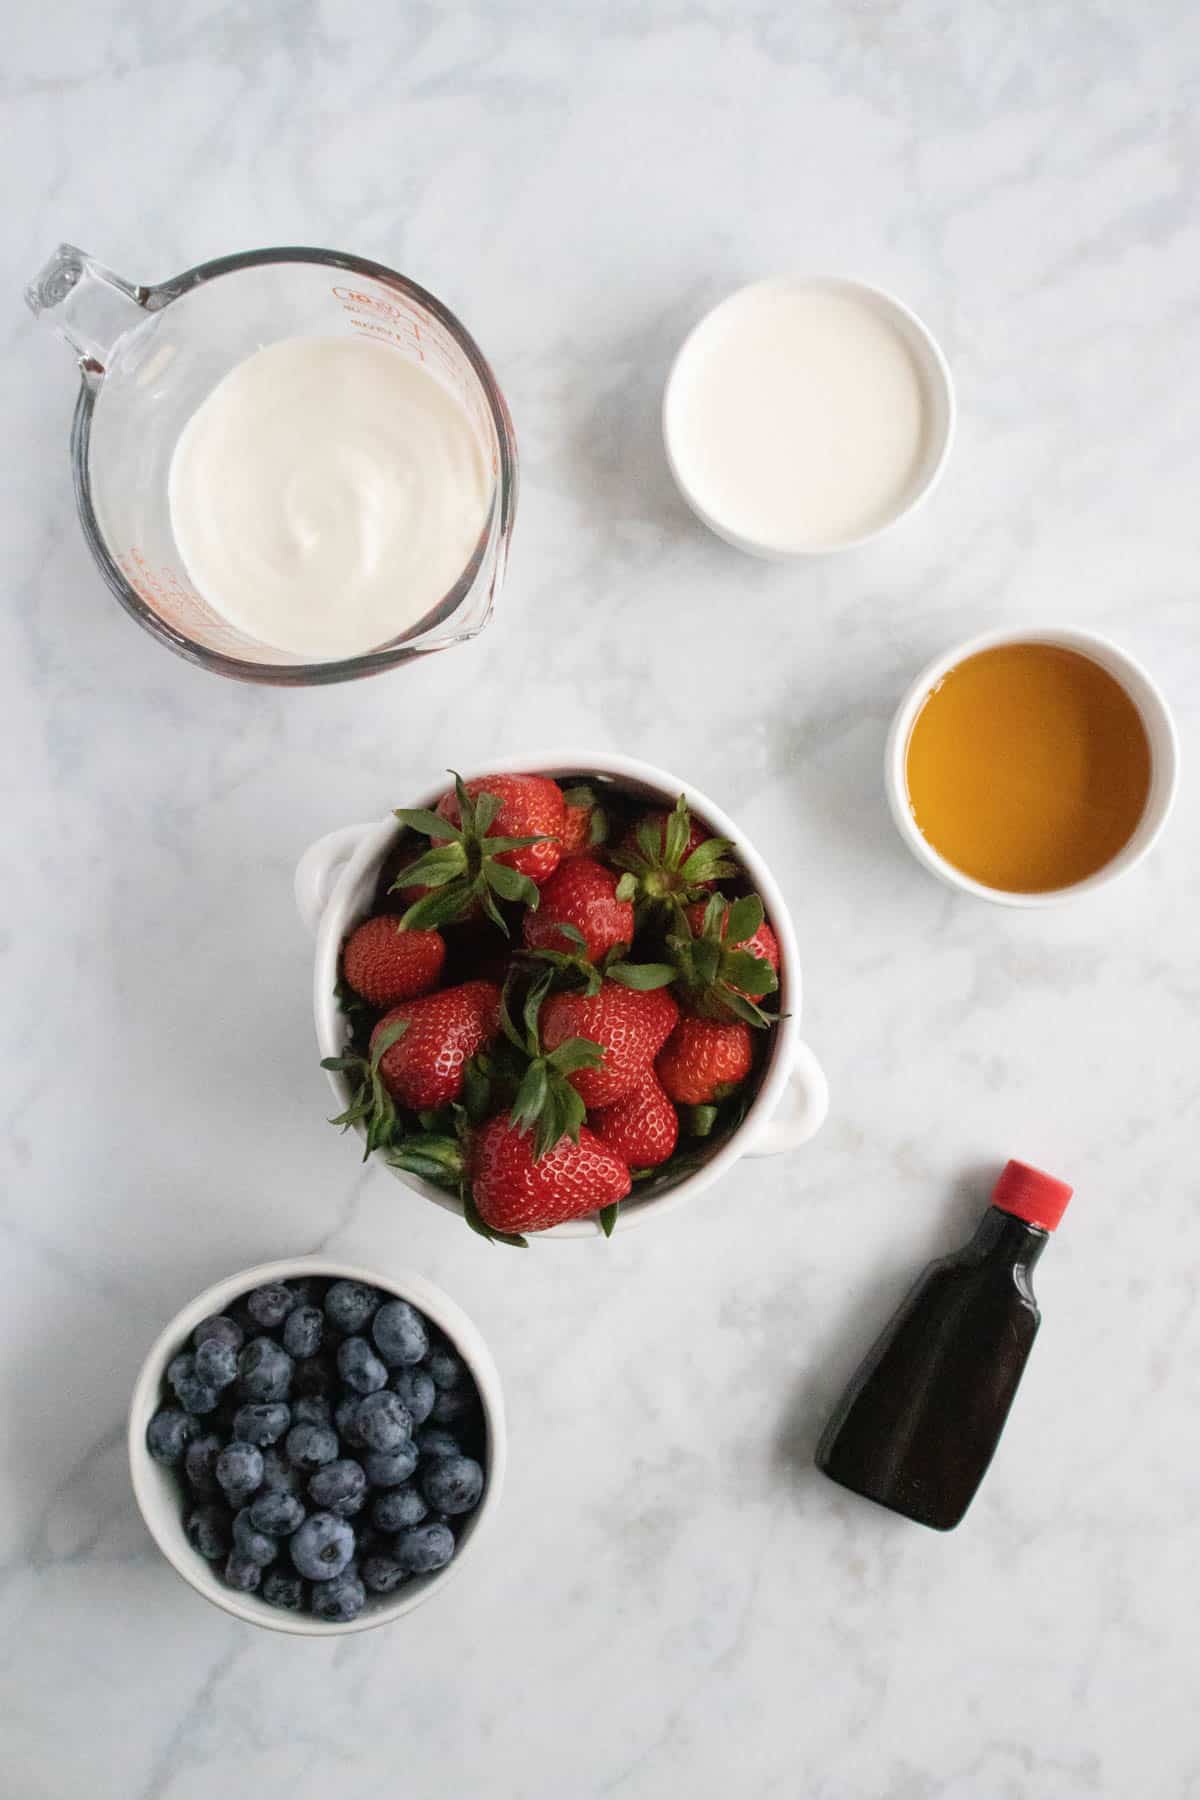 Ingredients for strawberry and blueberry patriotic popsicles.